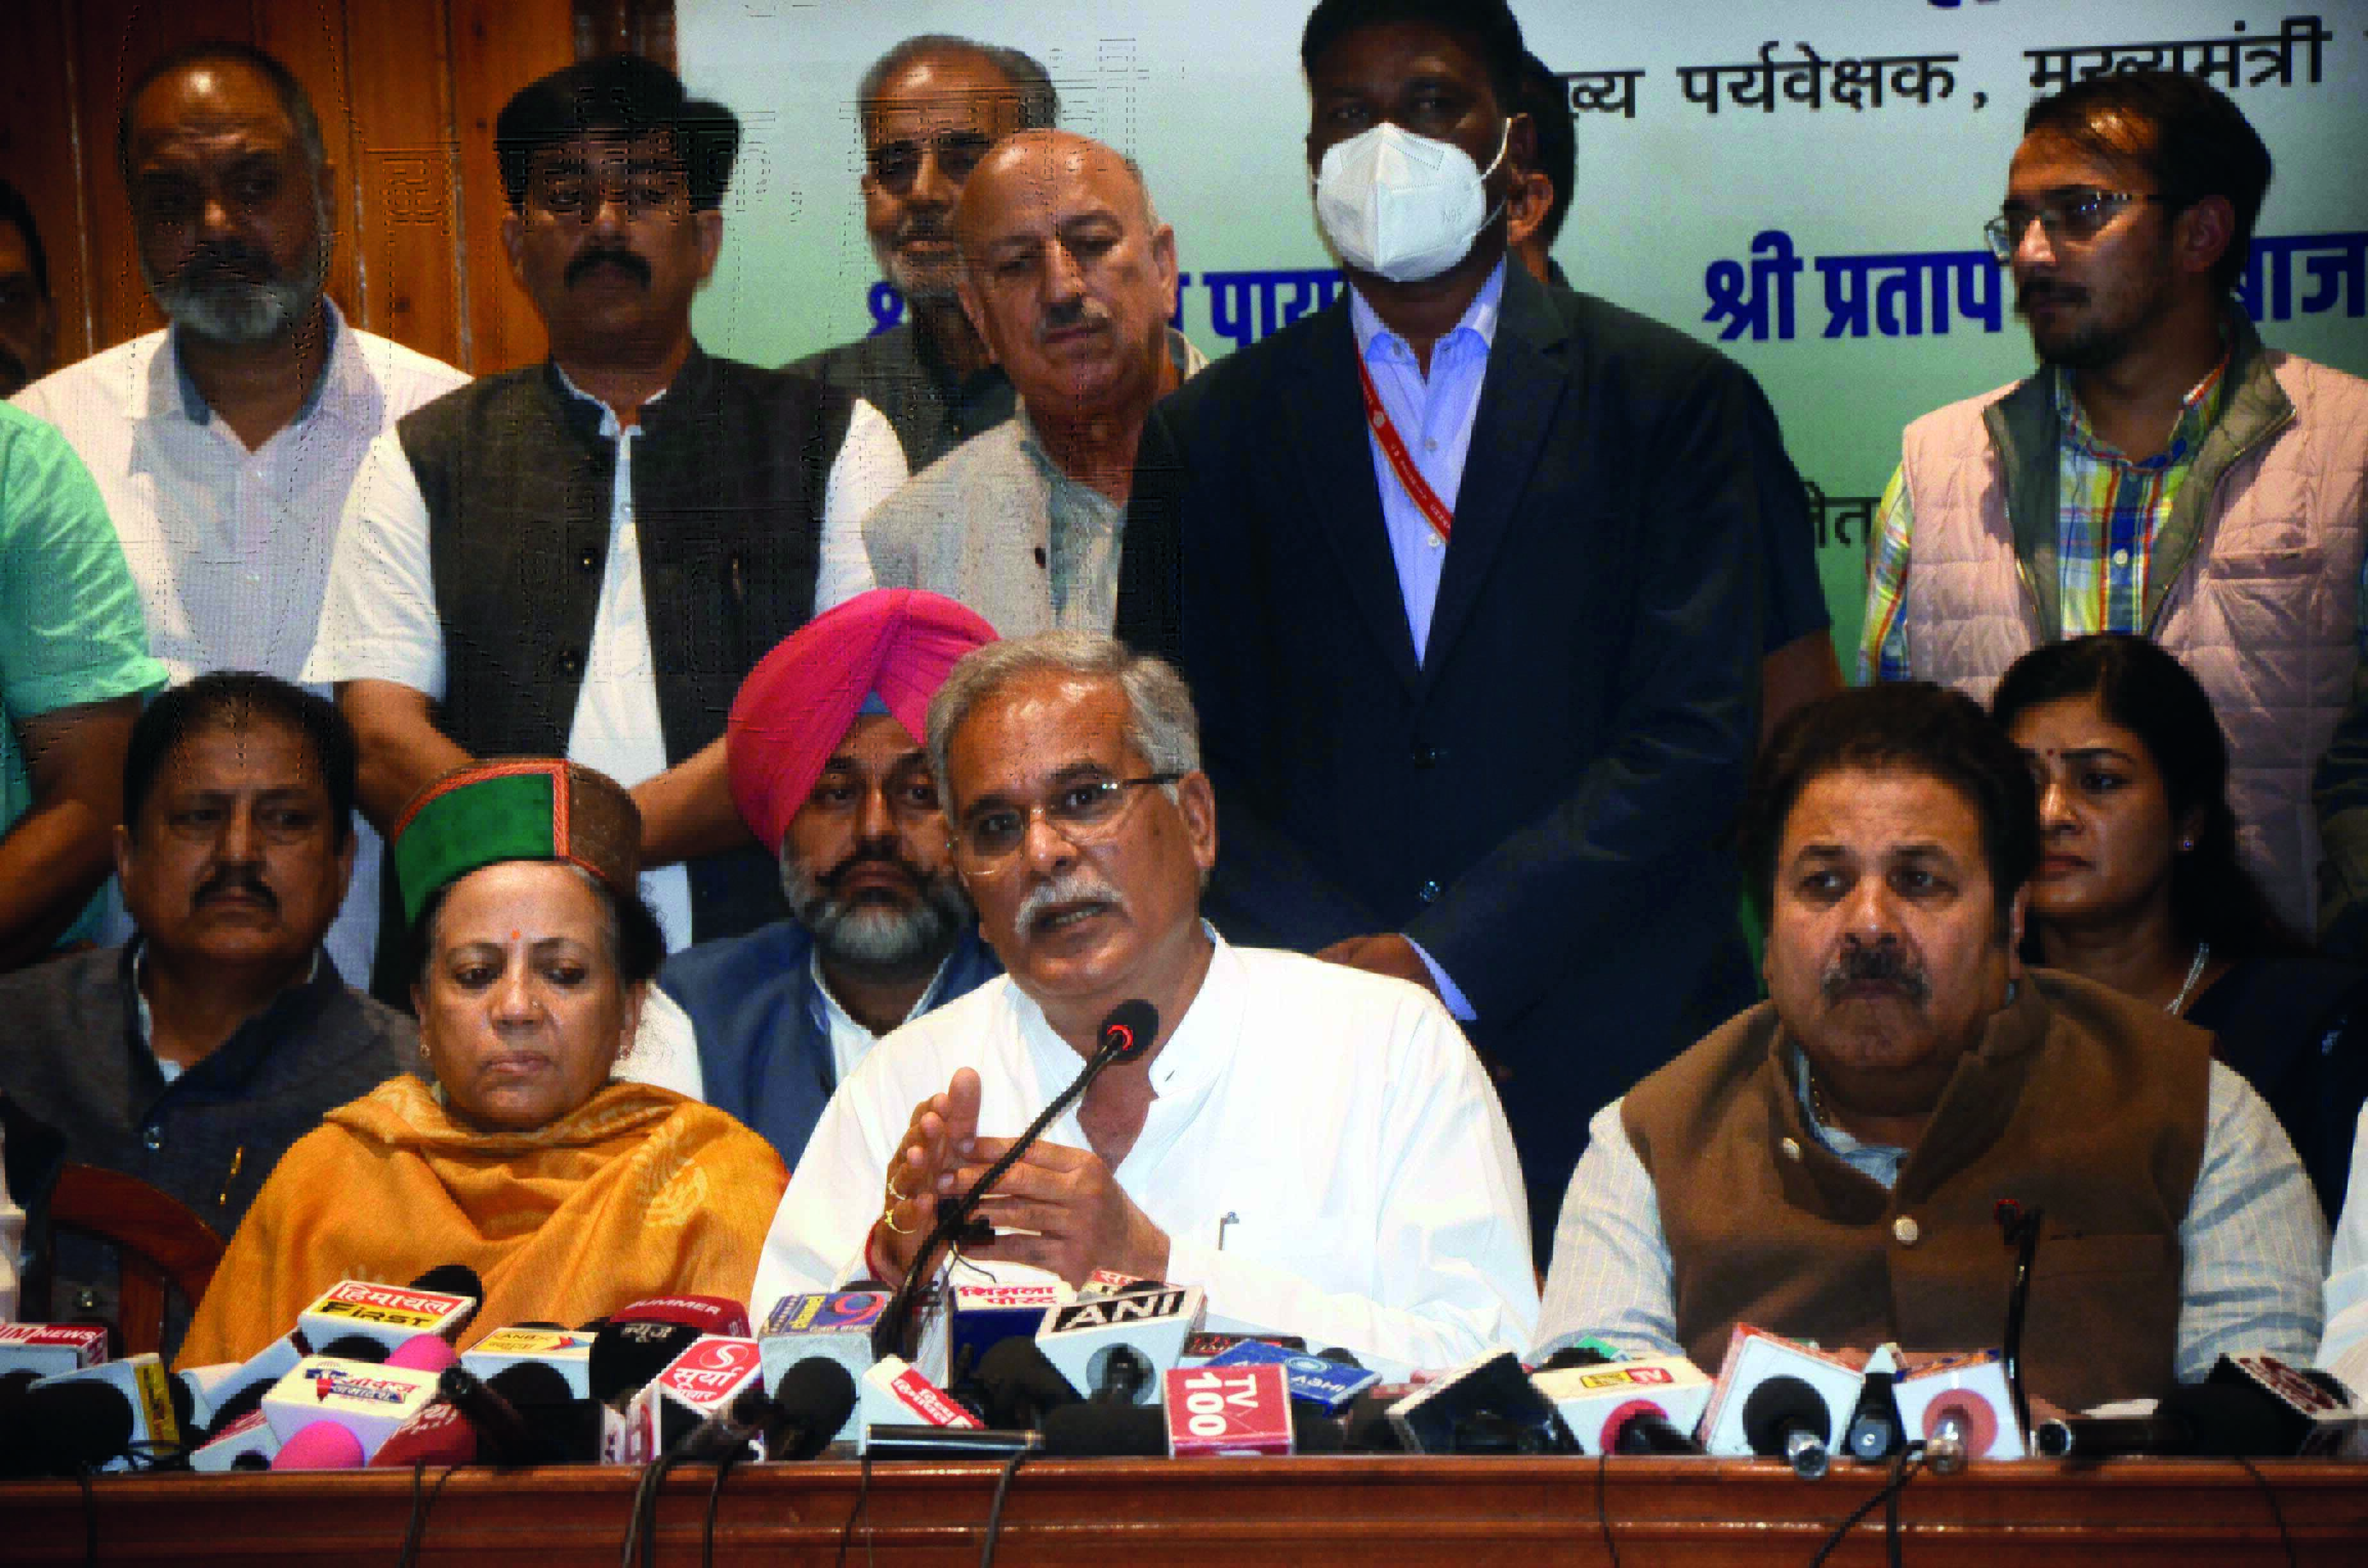 No CM face in Himachal Pradesh, says Baghel; promises 300 units of free power